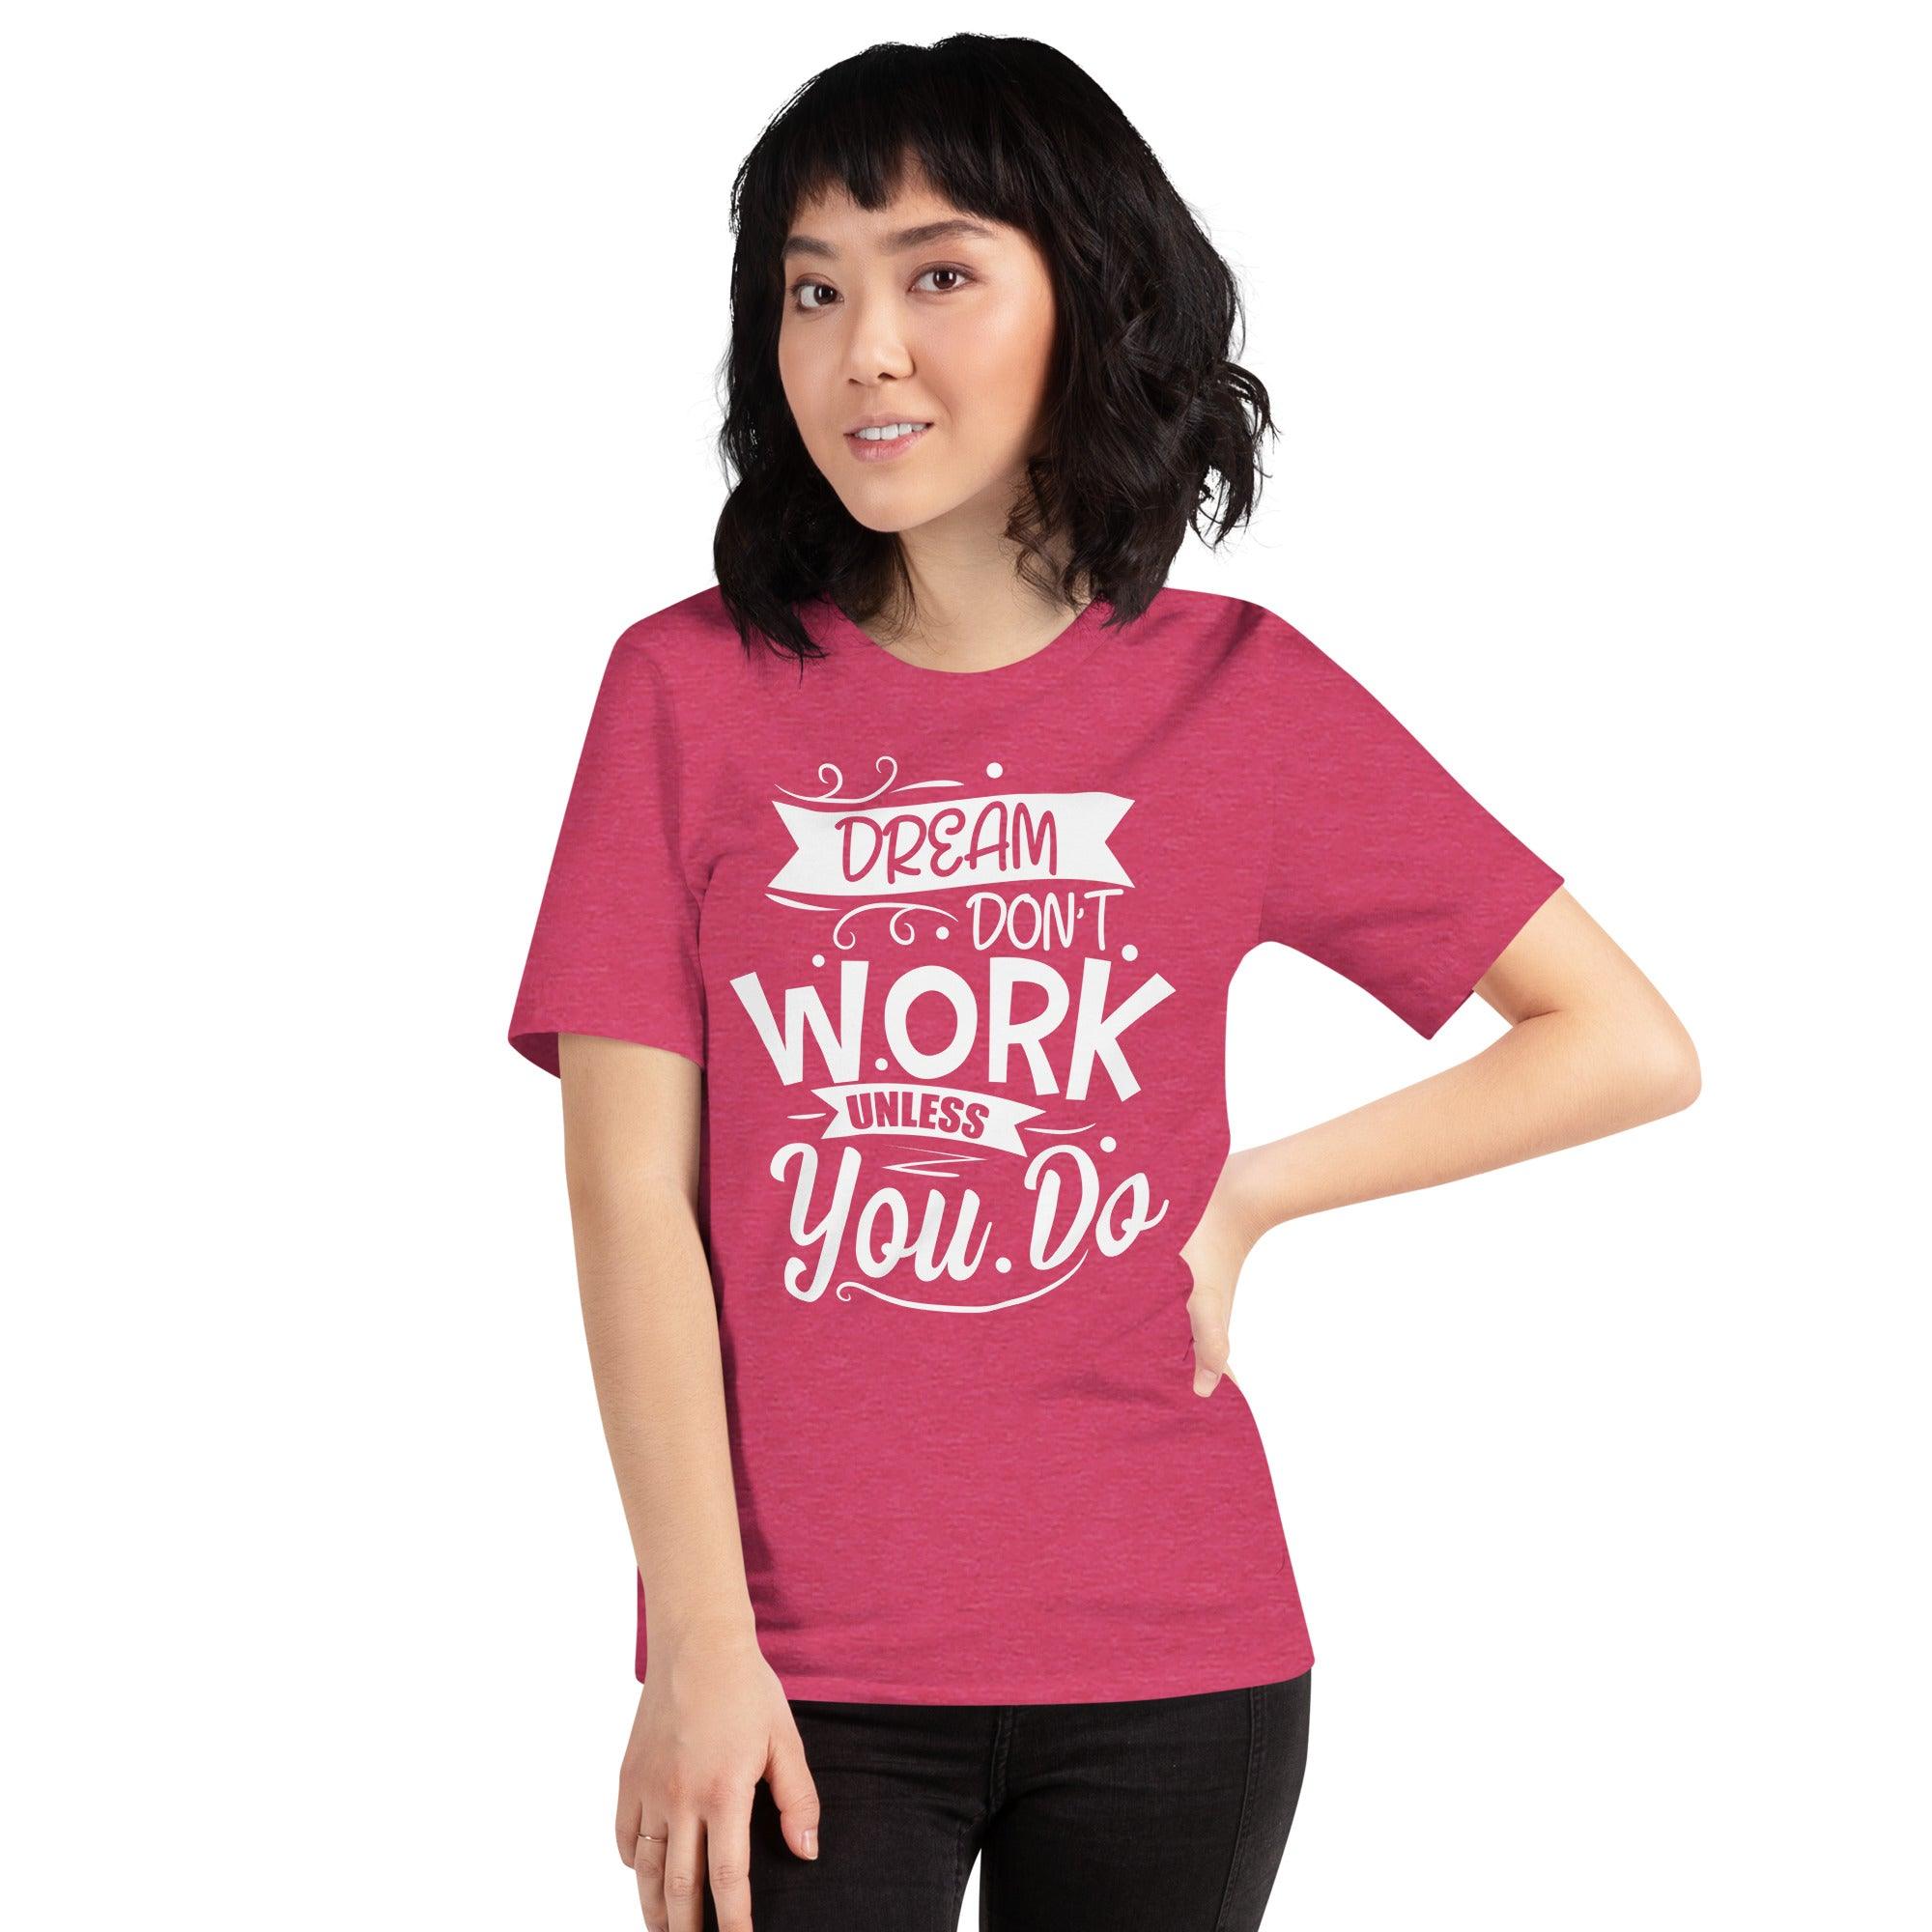 Dreams Don't Work Unless You Do | Women's Shirt With Quotes - Affirm Effect